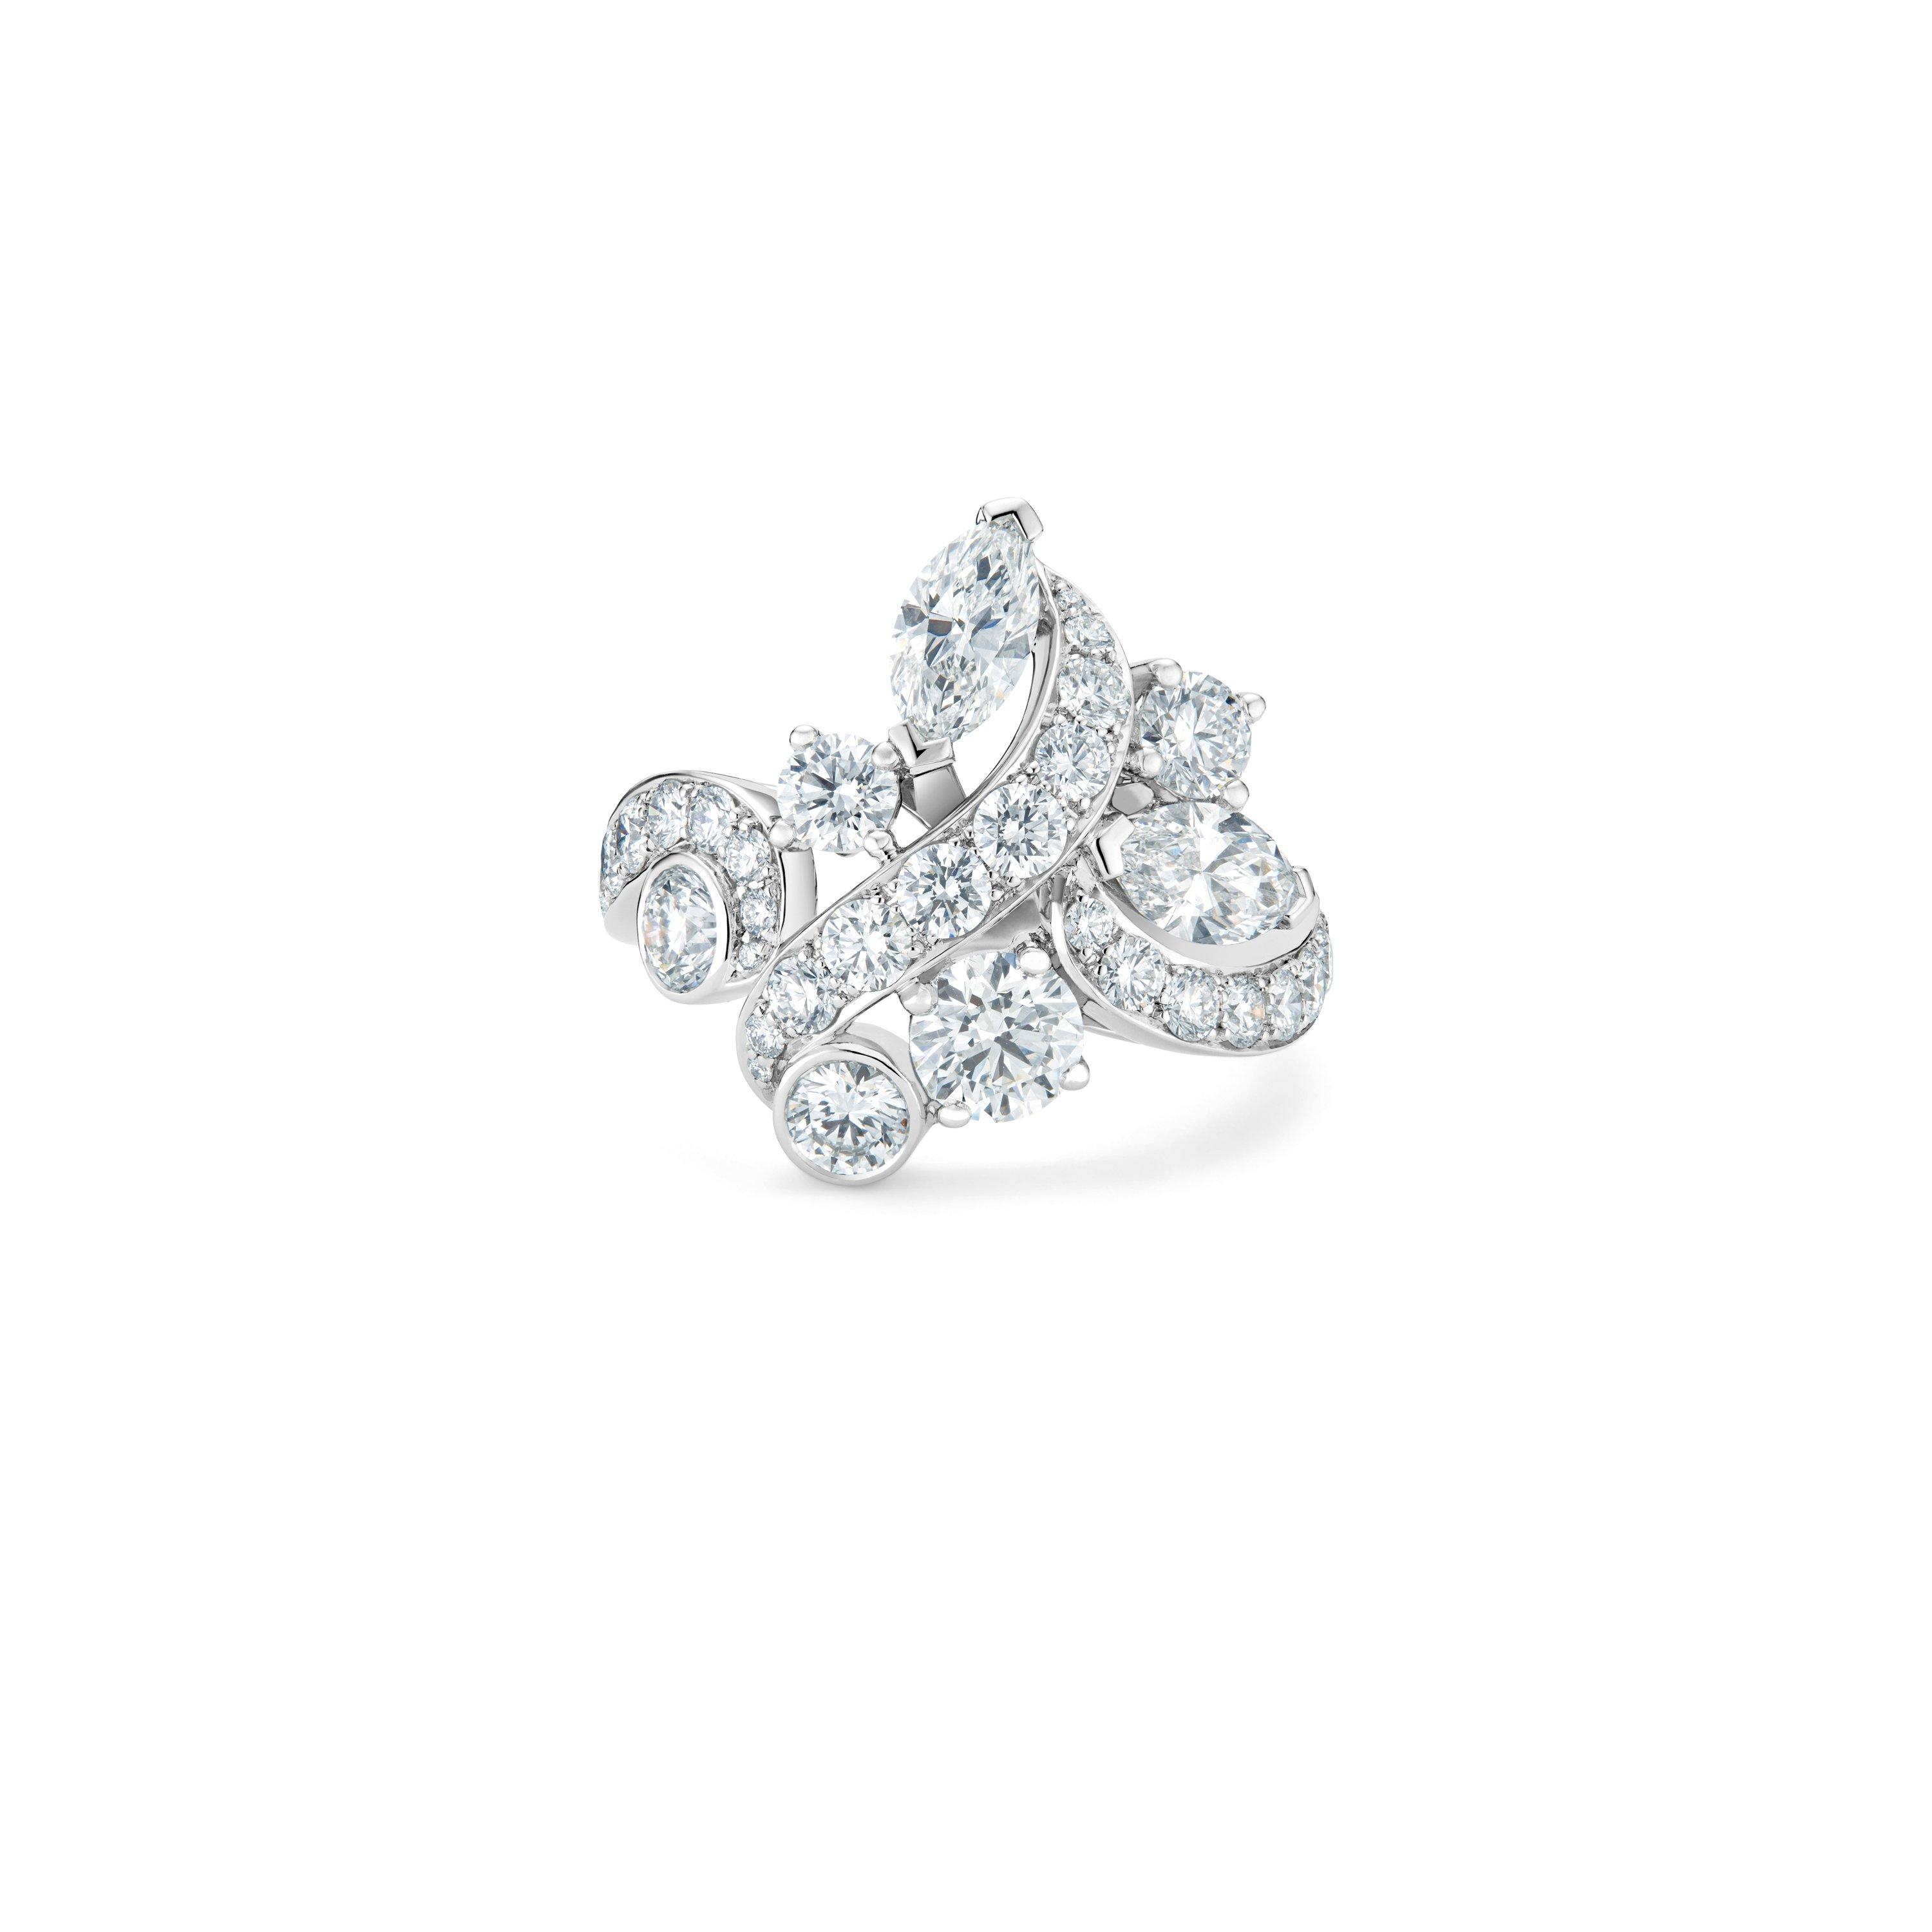 Adonis Rose cluster ring in white gold, image 1